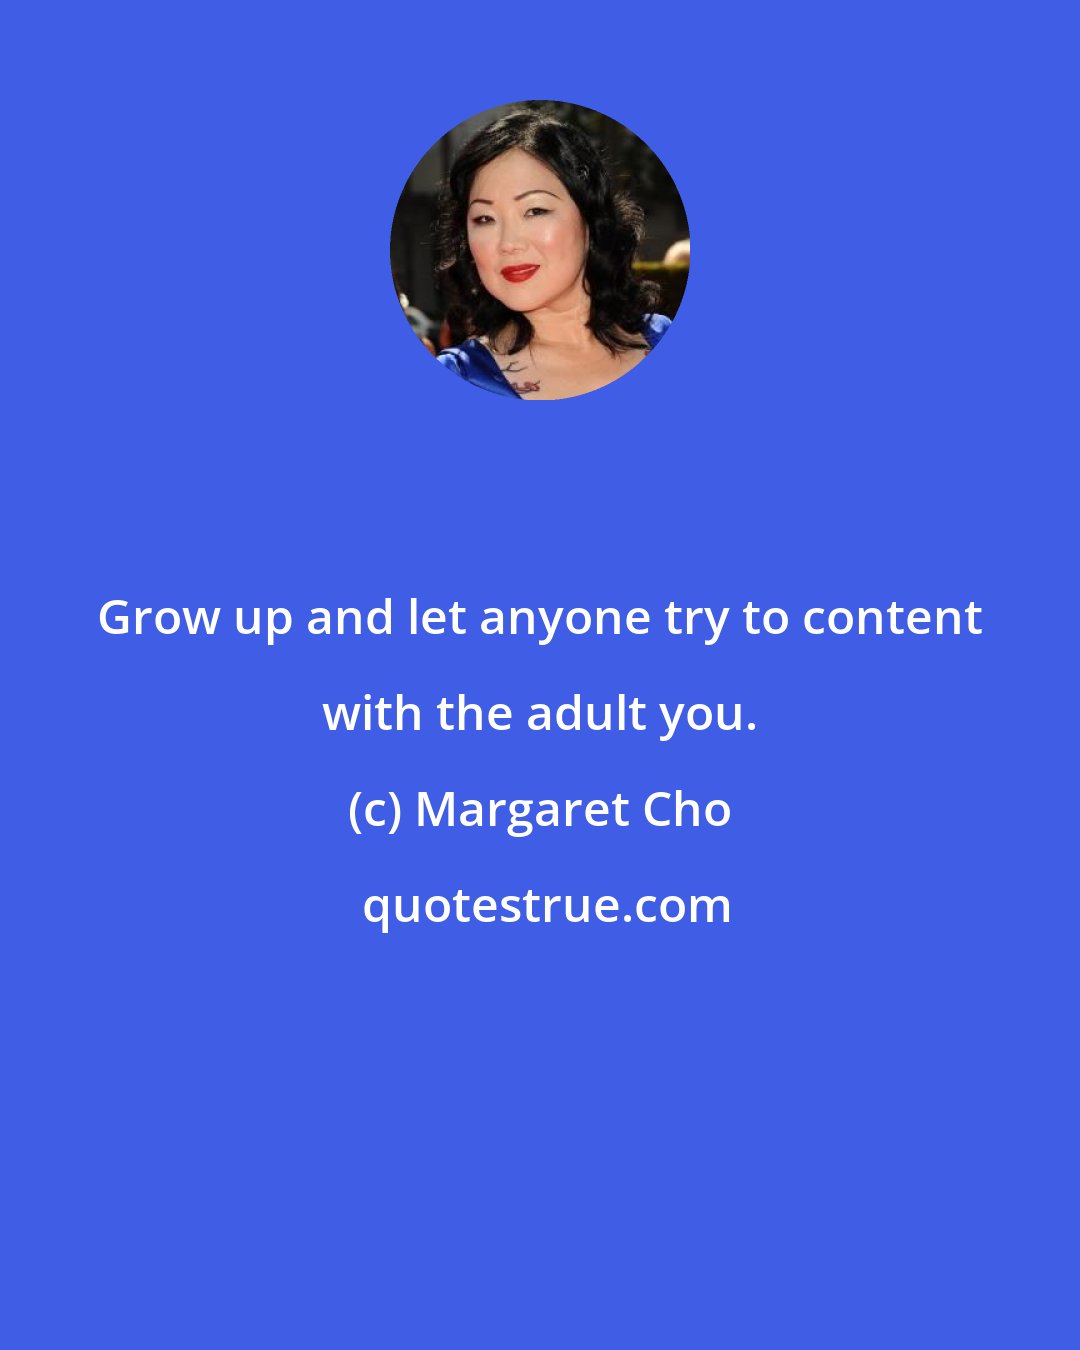 Margaret Cho: Grow up and let anyone try to content with the adult you.